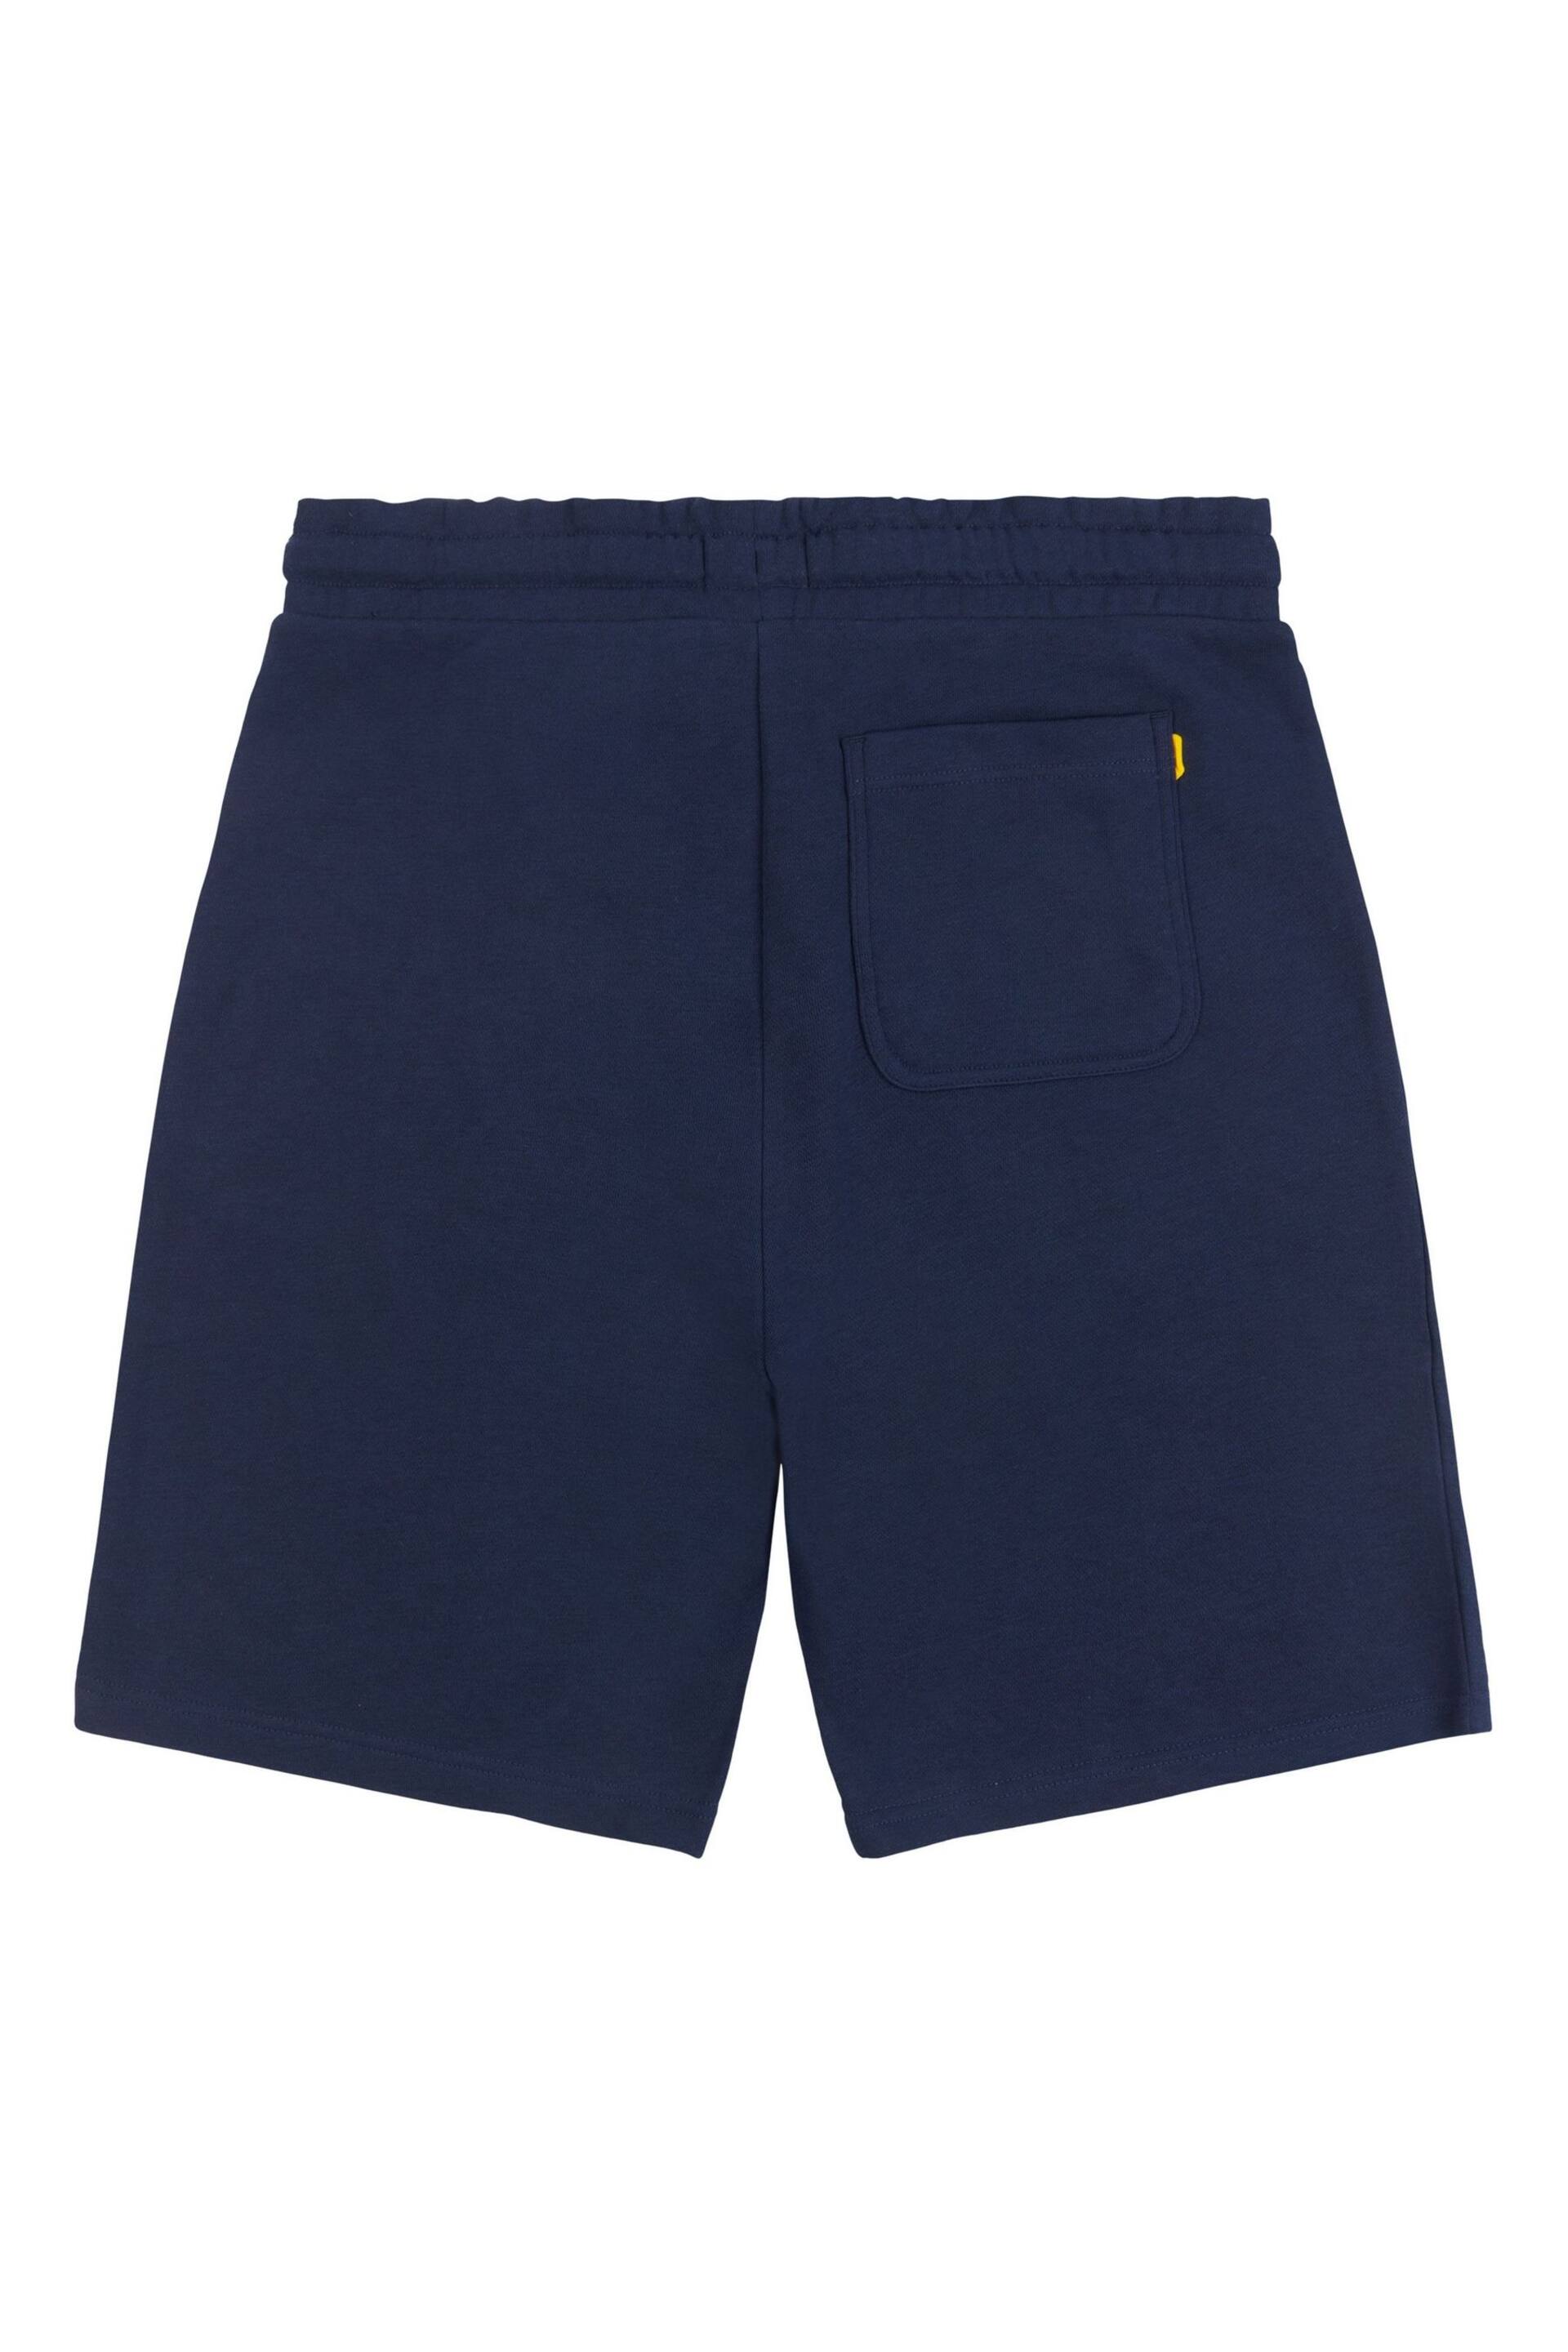 Flyers Mens Classic Fit Shorts - Image 7 of 8